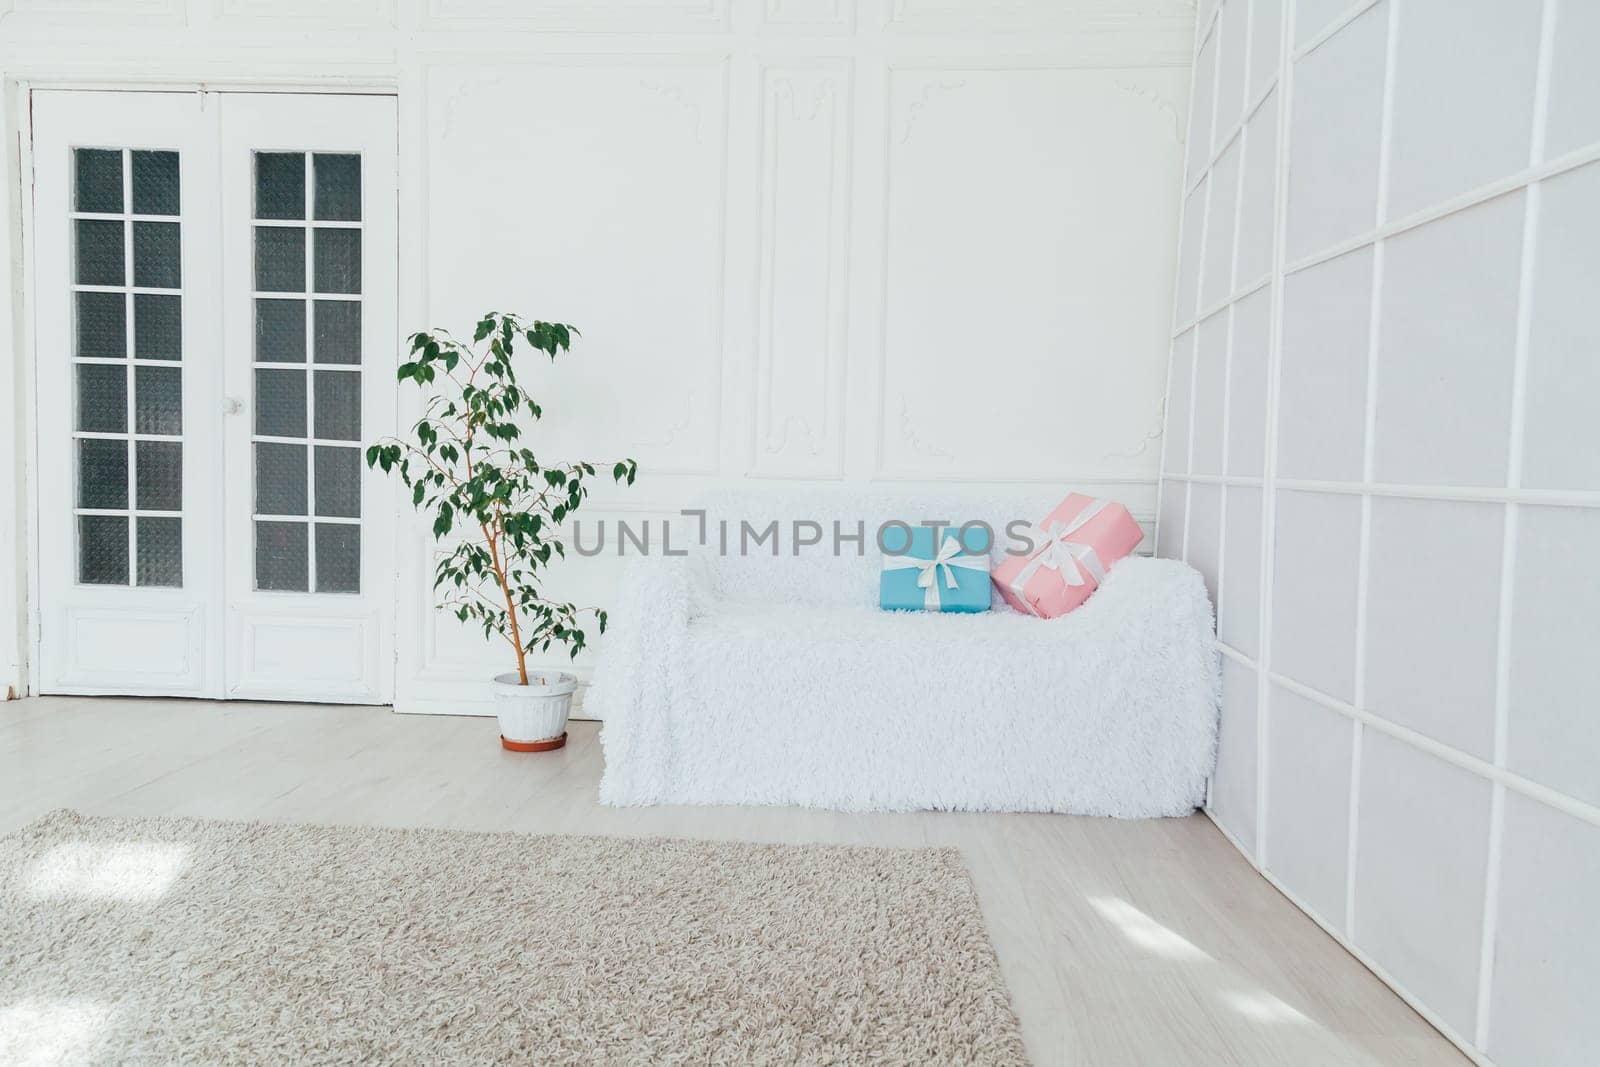 white sofa with a gift in the interior of an empty white room